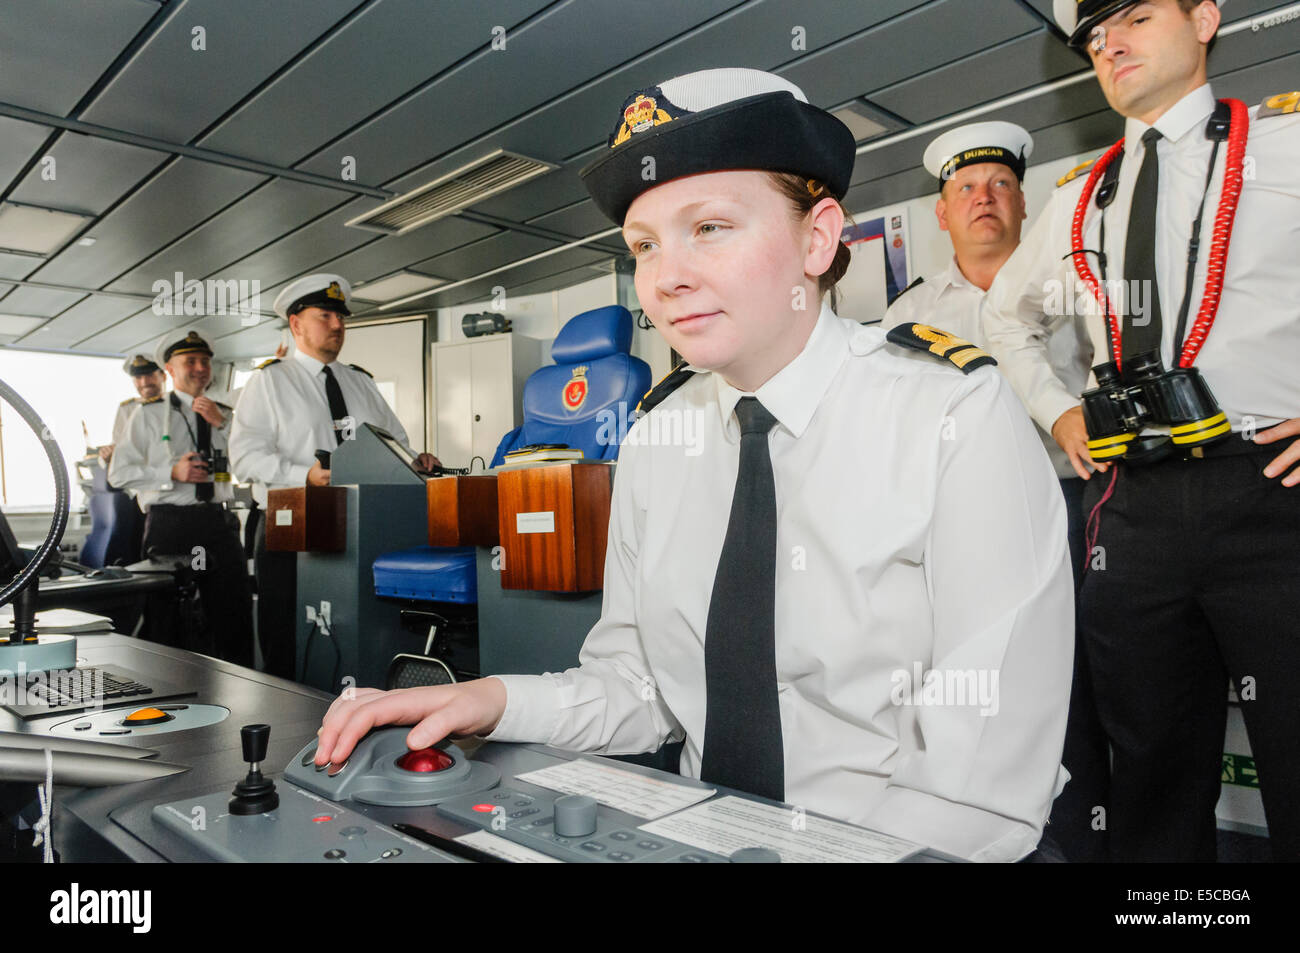 Belfast, Northern Ireland. 26/07/2014 - Chief Radar Officer keeps a check on the approach path as the newest ship in the Royal Navy, the Type 45 destroyer HMS Duncan, arrives into her adopted city of Belfast for a three day visit. Credit:  Stephen Barnes/Alamy Live News Stock Photo